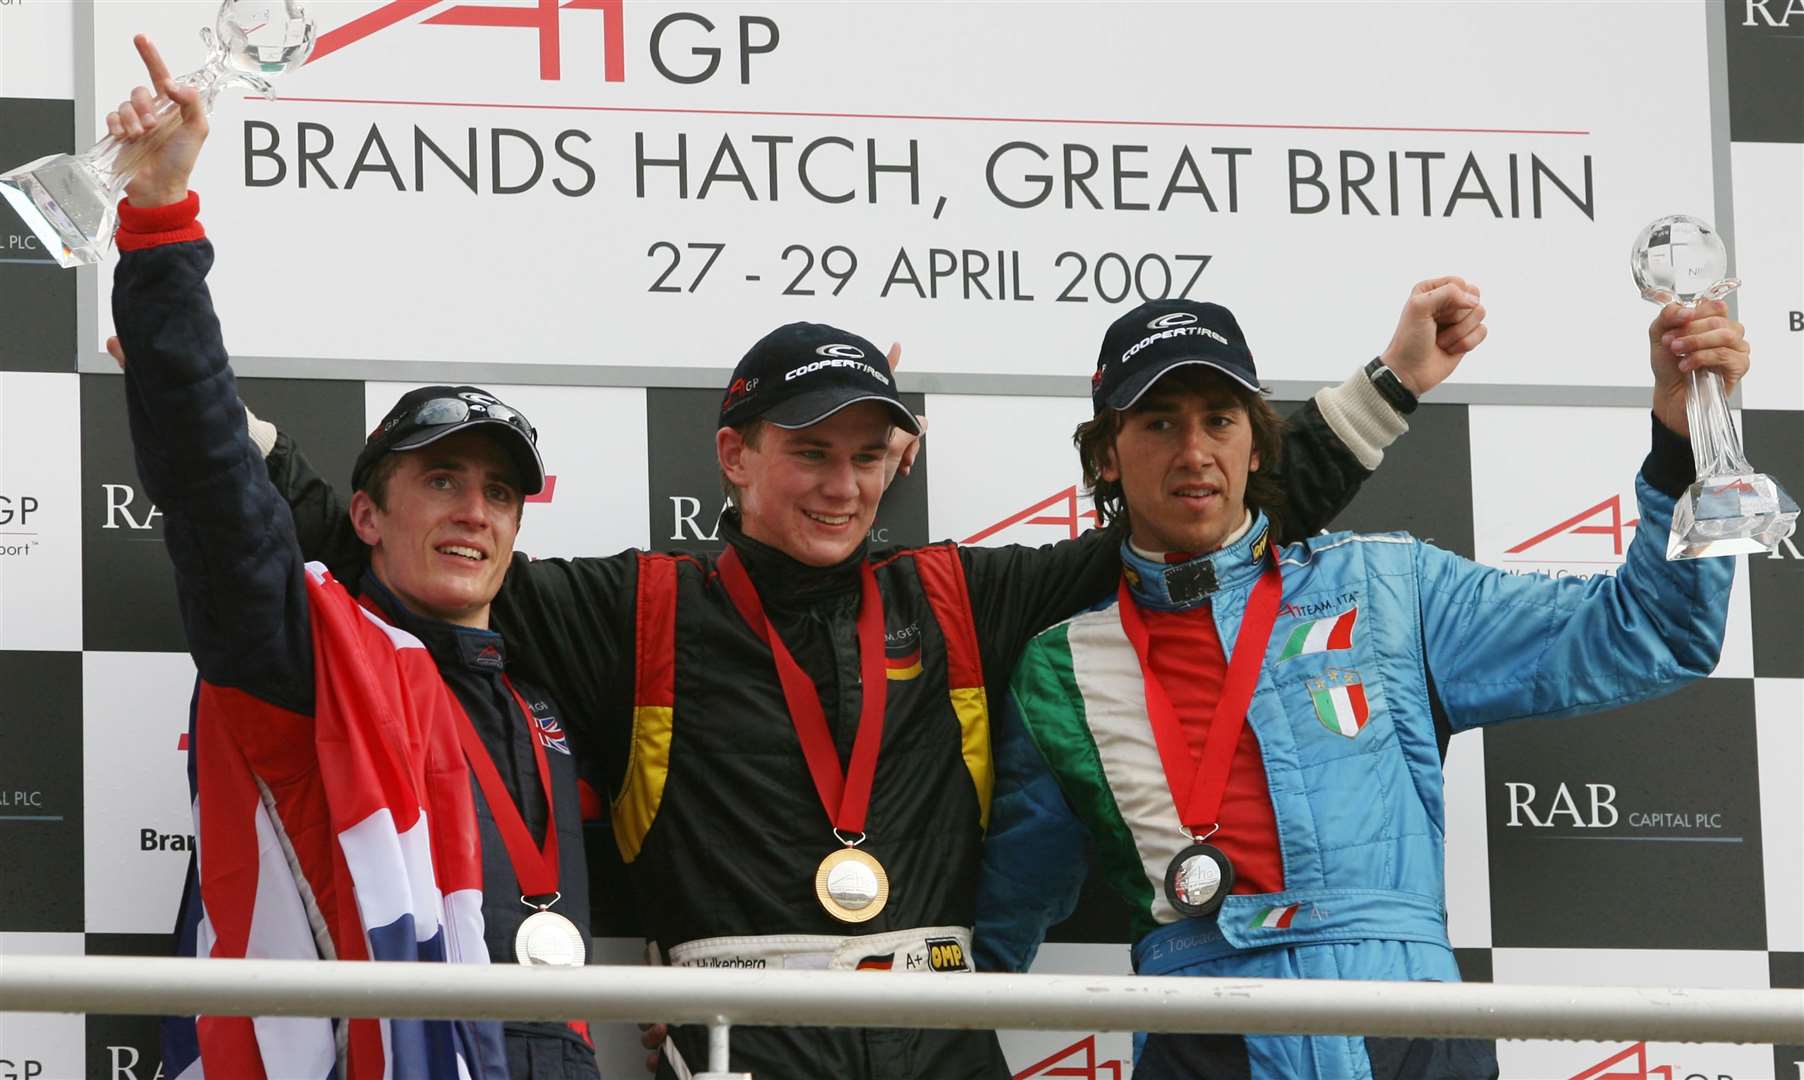 A young Nico Hulkenberg won race two at Brands in April 2007. Team GB's Robbie Kerr and Italy's Enrico Toccacelo joined him on the podium